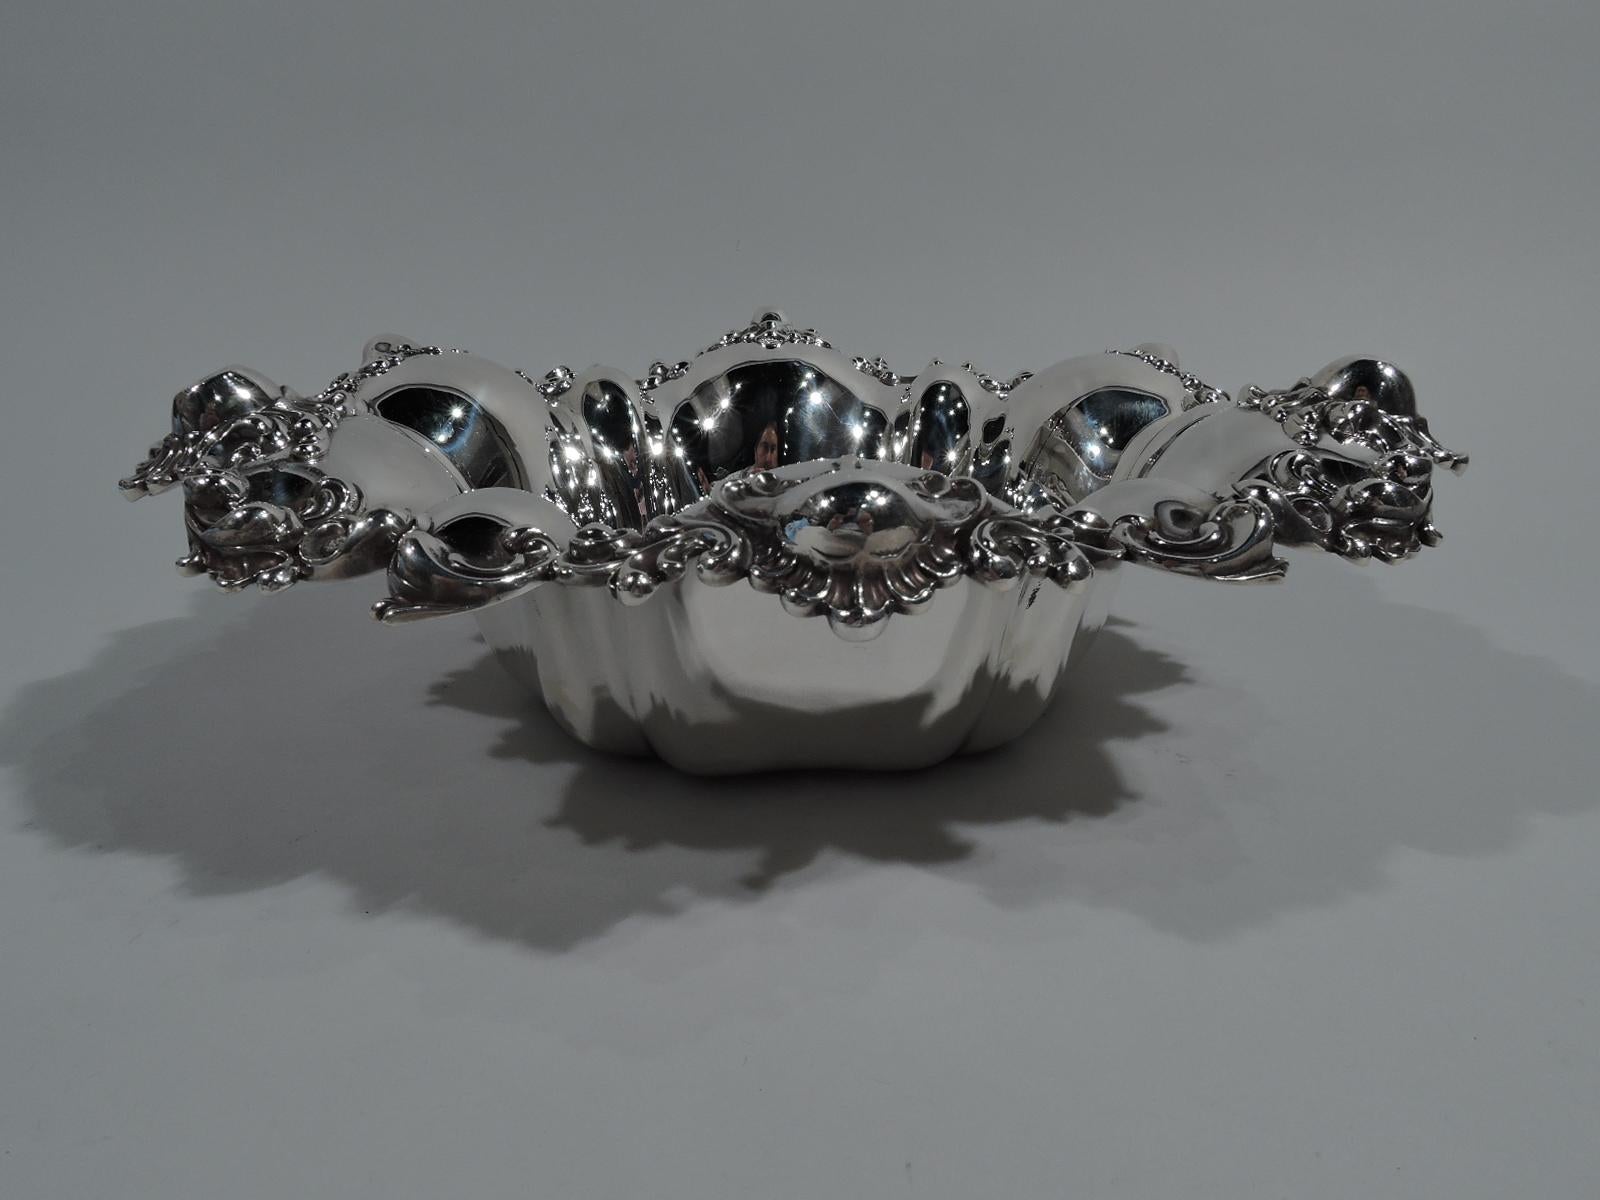 Super fancy sterling silver bowl. Made by Meriden Britannia (part of International) in Meriden, Conn., ca 1900. Lobed well and wavy rim with applied scrolls and leaves. Tactile with nice heft. Fully marked and numbered C2875. Heavy weight: 20 troy